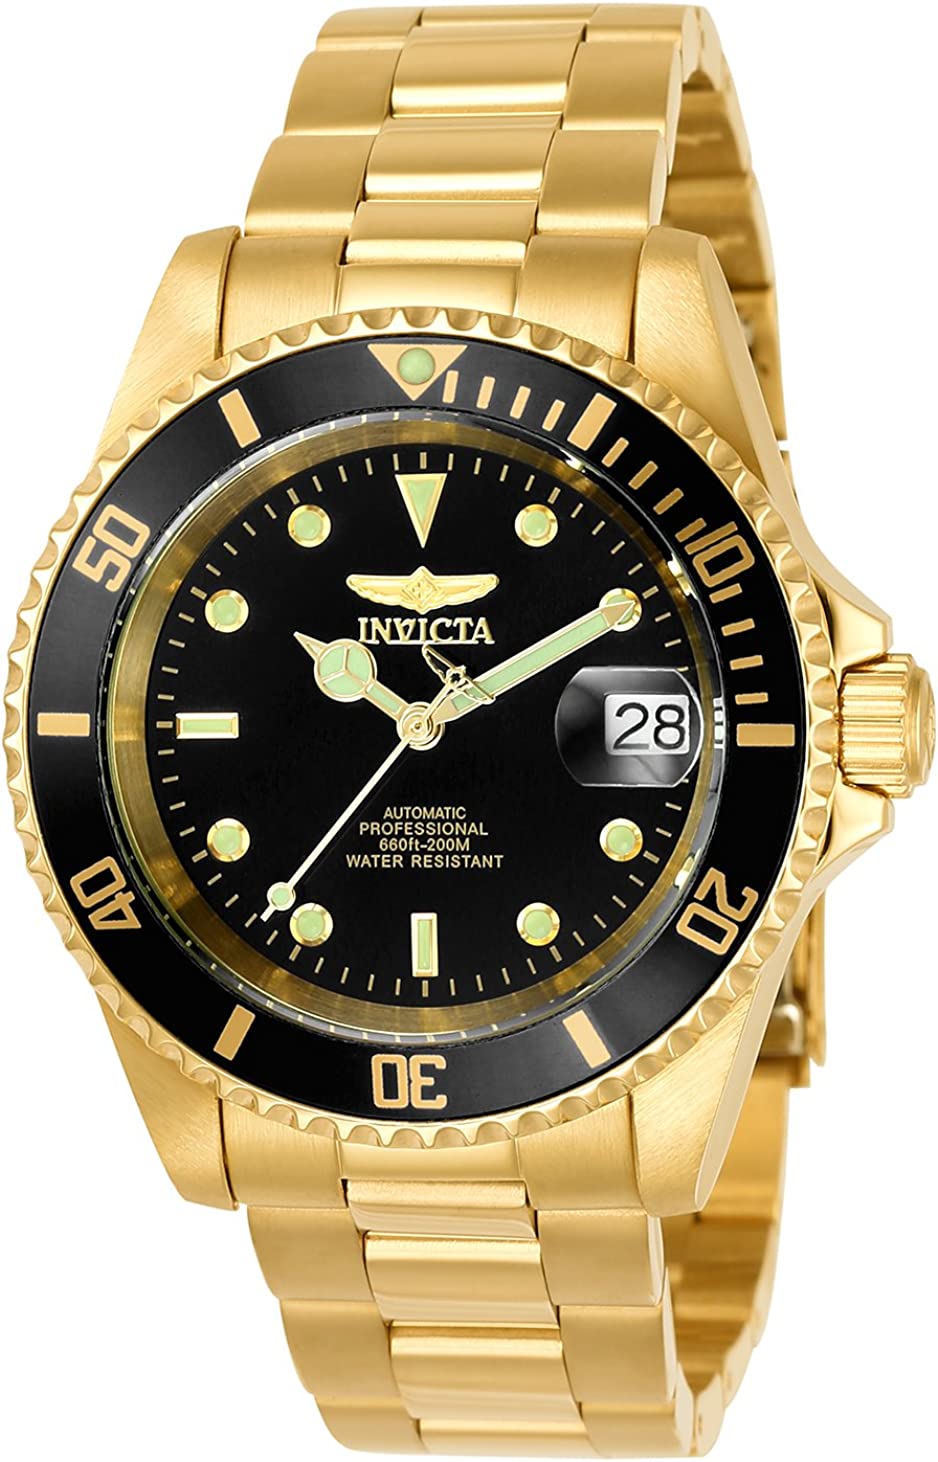 Invicta Men's 8929OB Pro Diver Analog Display Japanese Automatic Gold/Black Watch